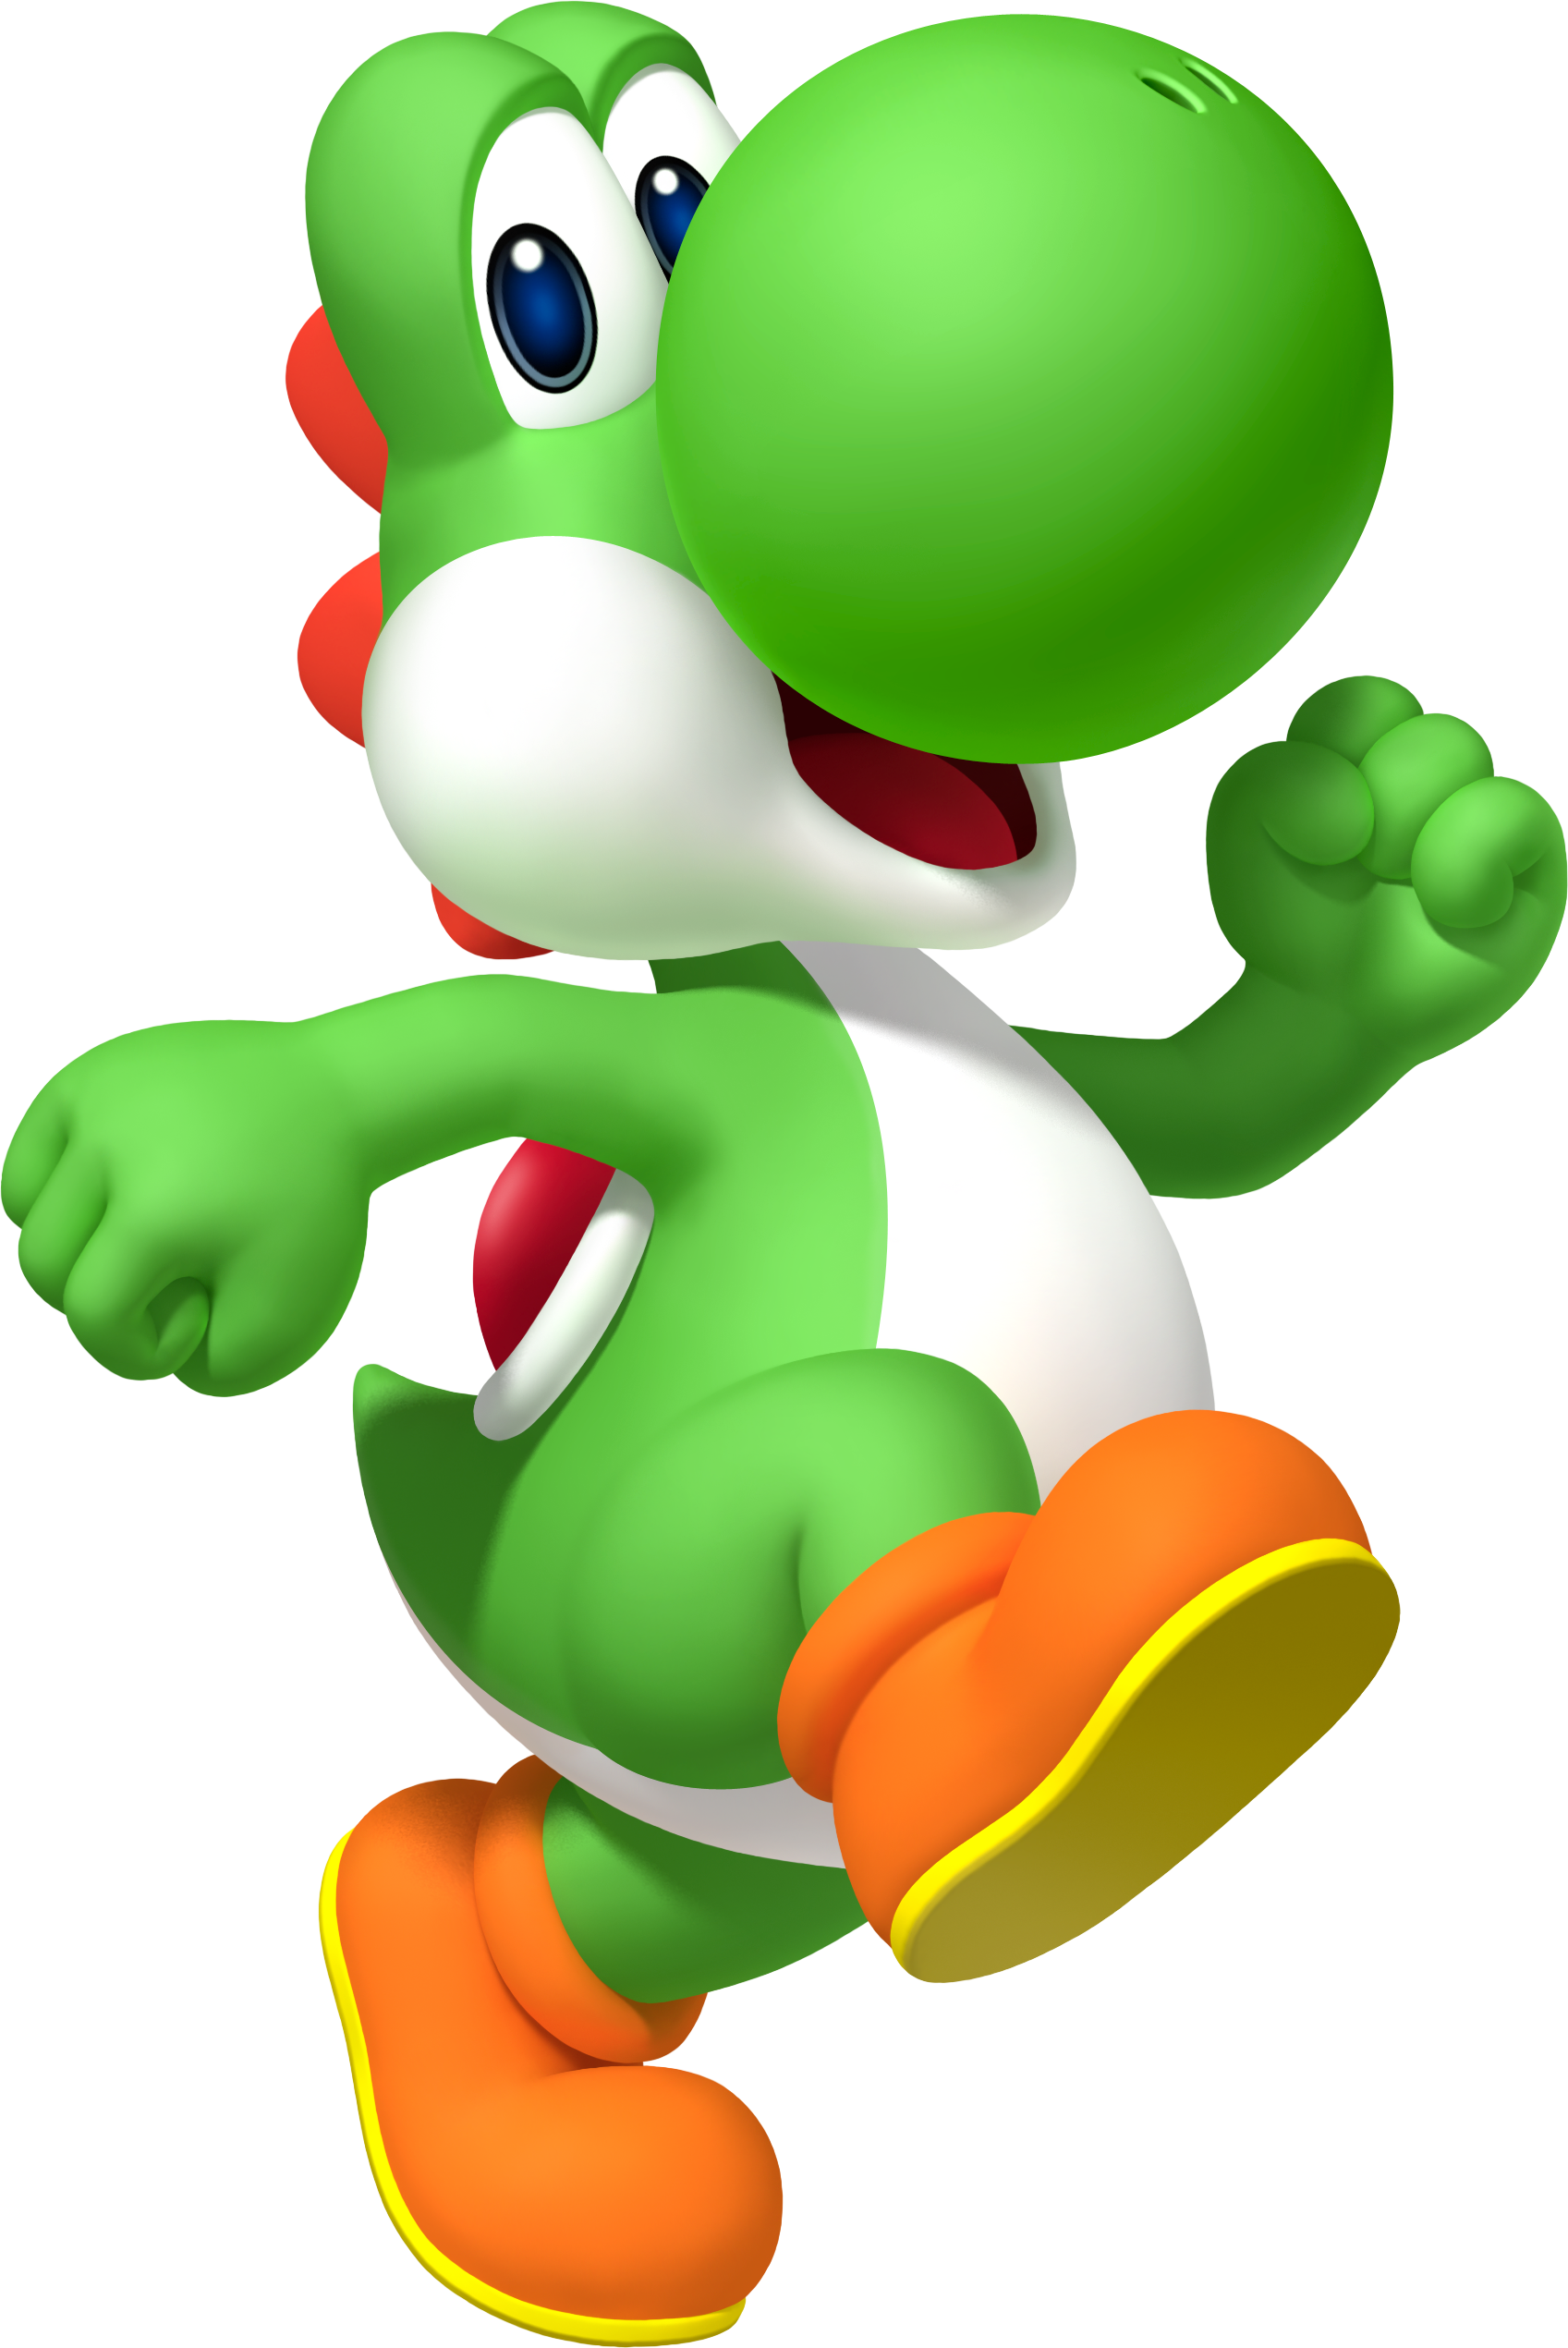 There Is Nothing About Yoshi In The Way Of  Stare  Or Intelligence Or